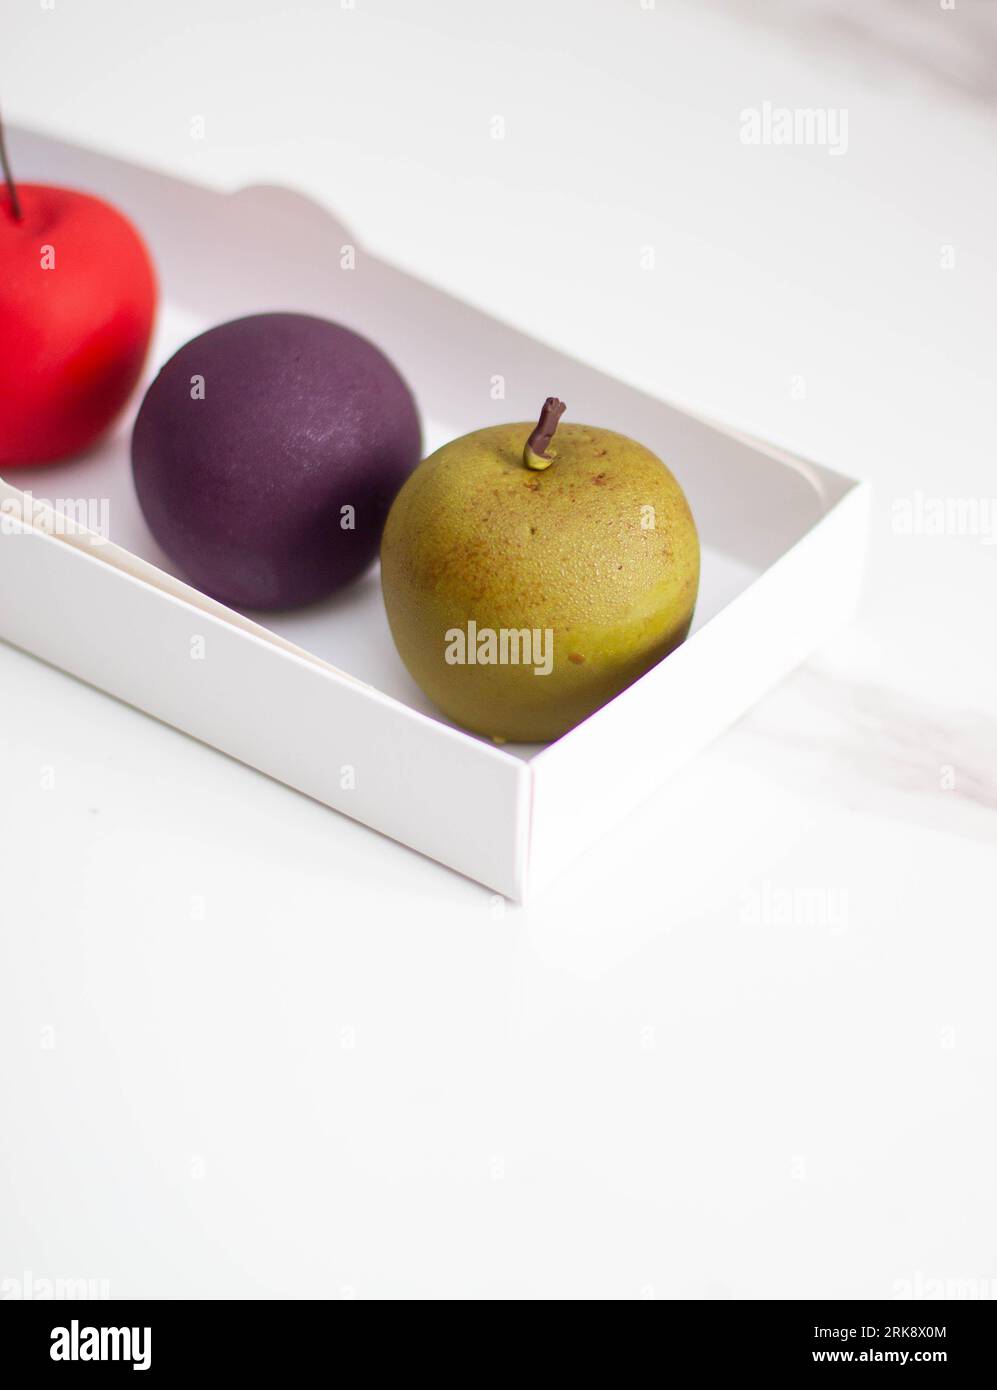 Modern realistic fruit pastries made of chocolate and mousse. Red apple, green apple, blueberry and passion fruit for cafe or restaurant Stock Photo